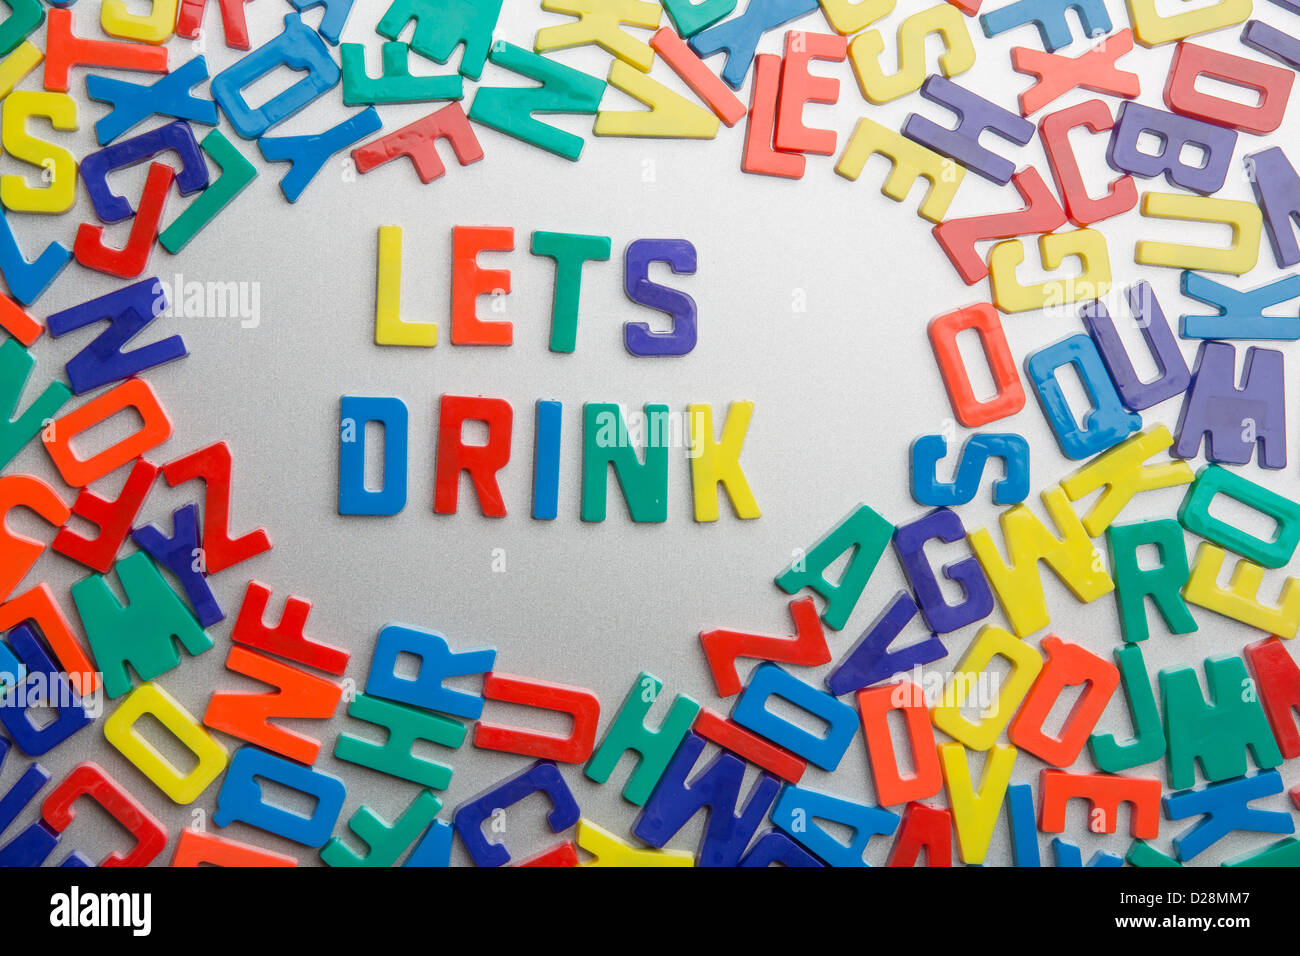 'Let's Drink' - Refrigerator magnets spell messages out of a jumble of letters Stock Photo